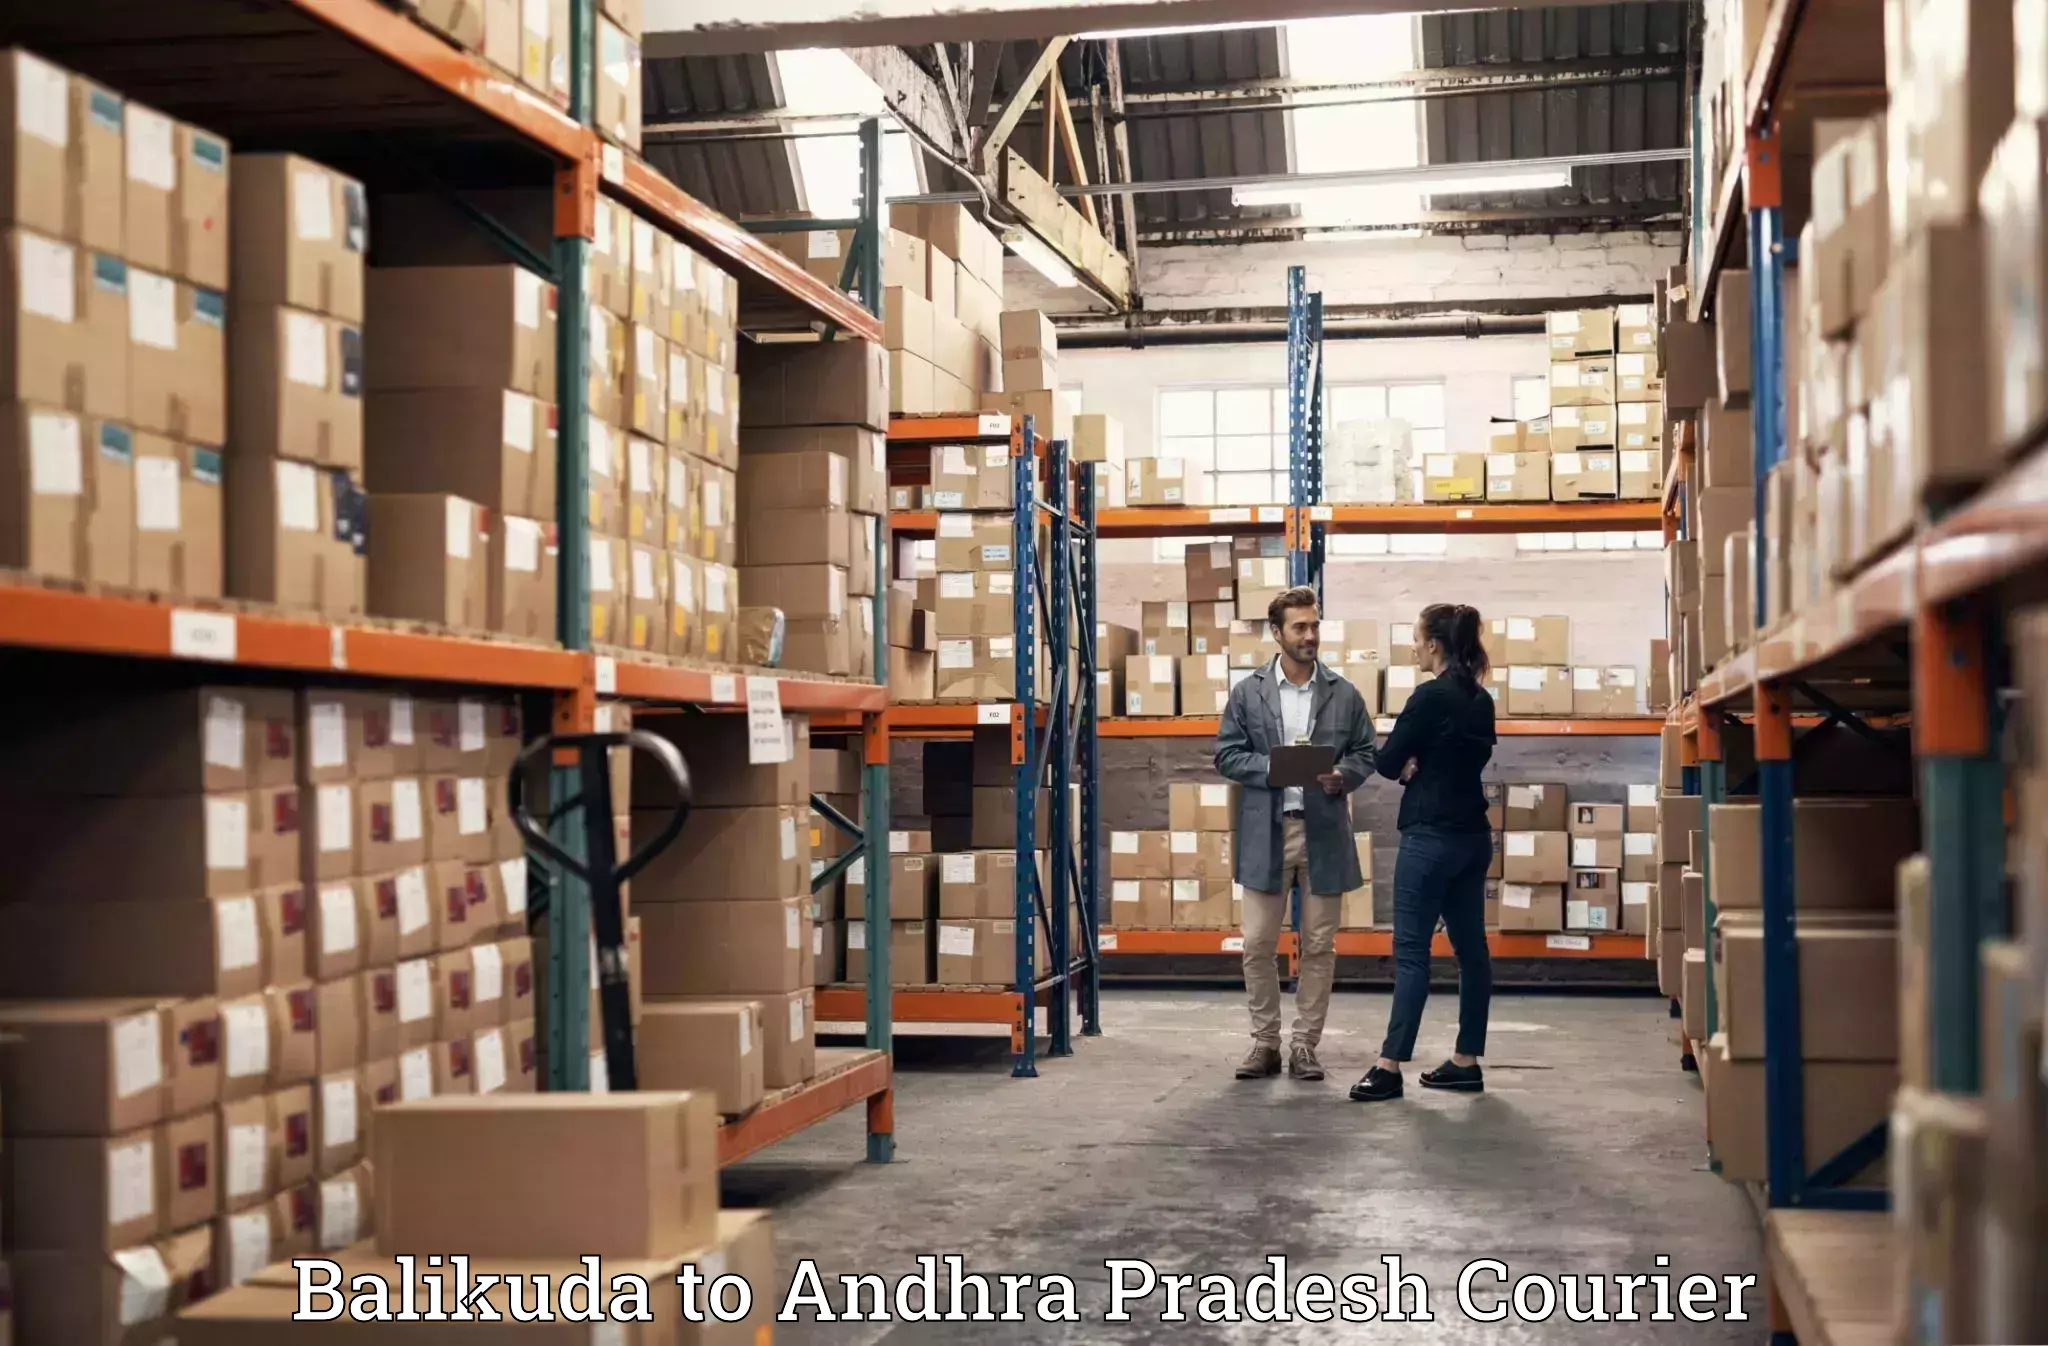 Moving and storage services in Balikuda to Gullapalli